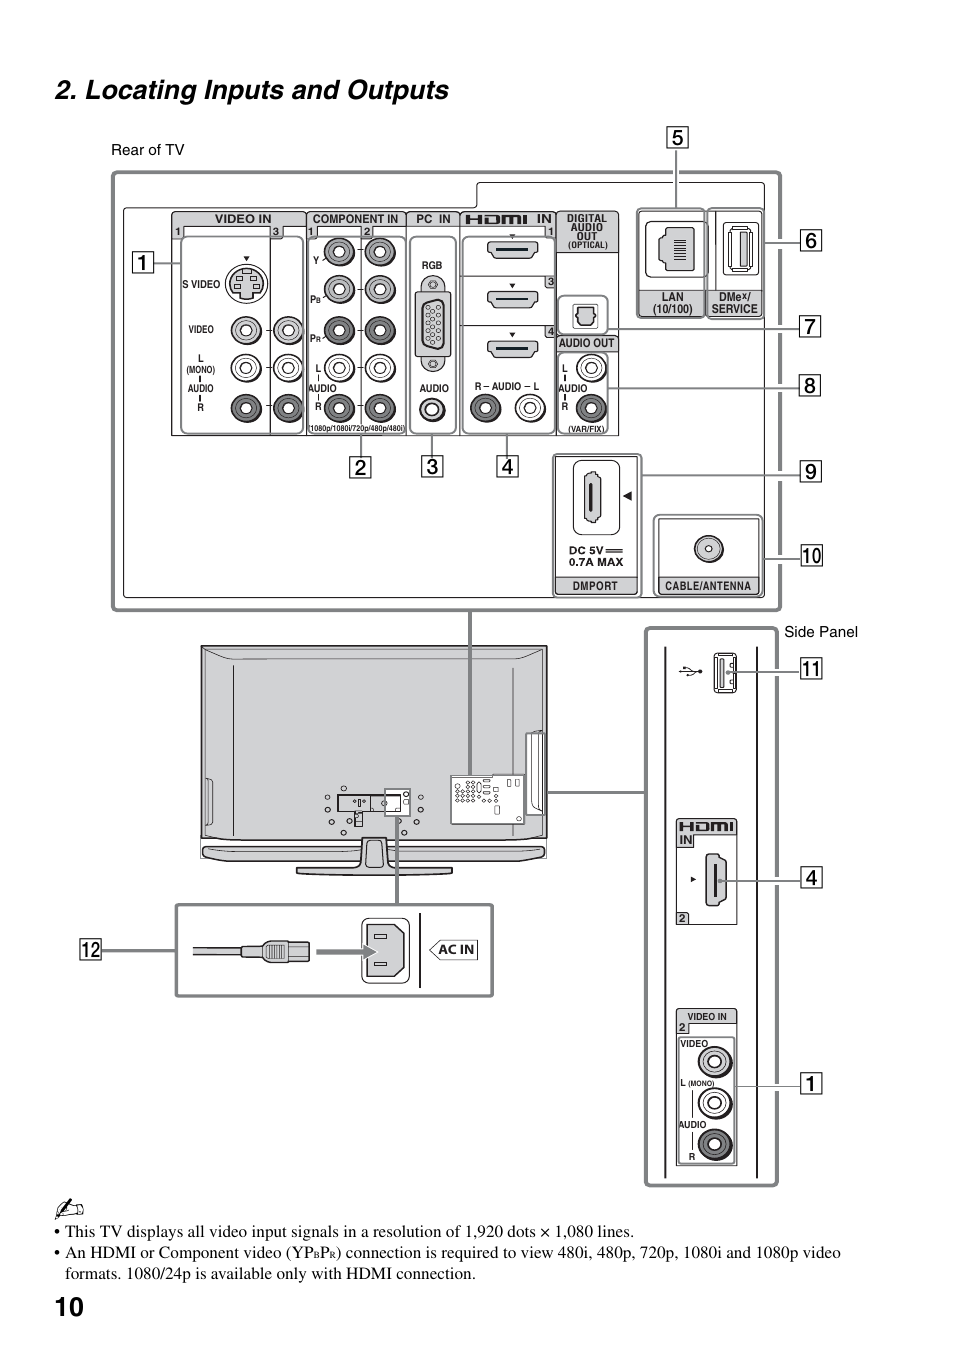 Locating inputs and outputs, 10 2. locating inputs and outputs, 0qa 1 qs | Sony KDL-52XBR7 User Manual | Page 10 / 60